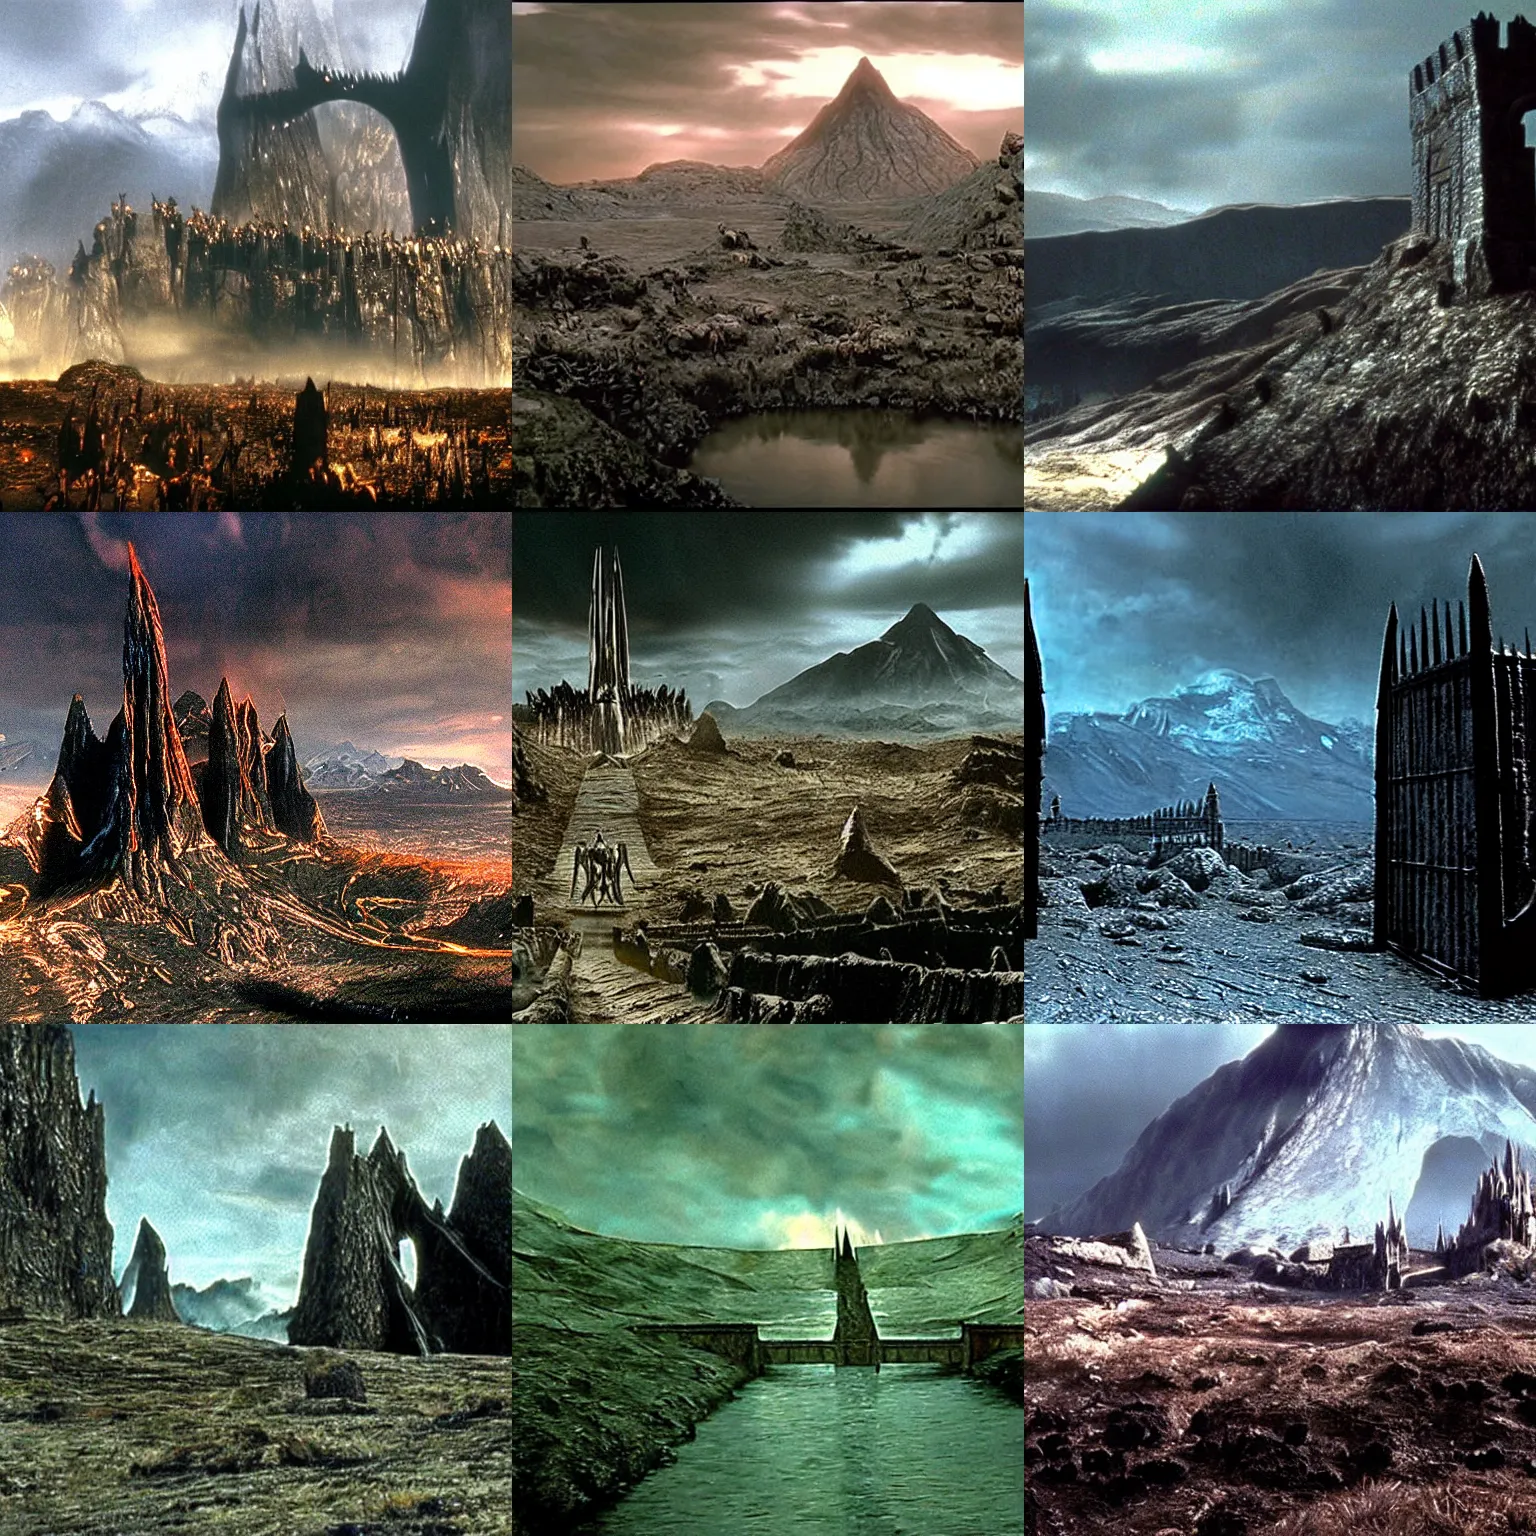 Prompt: The Black Gate in Mordor, landscape film still from the movie 'The Lord of the Rings: The Return of the King'